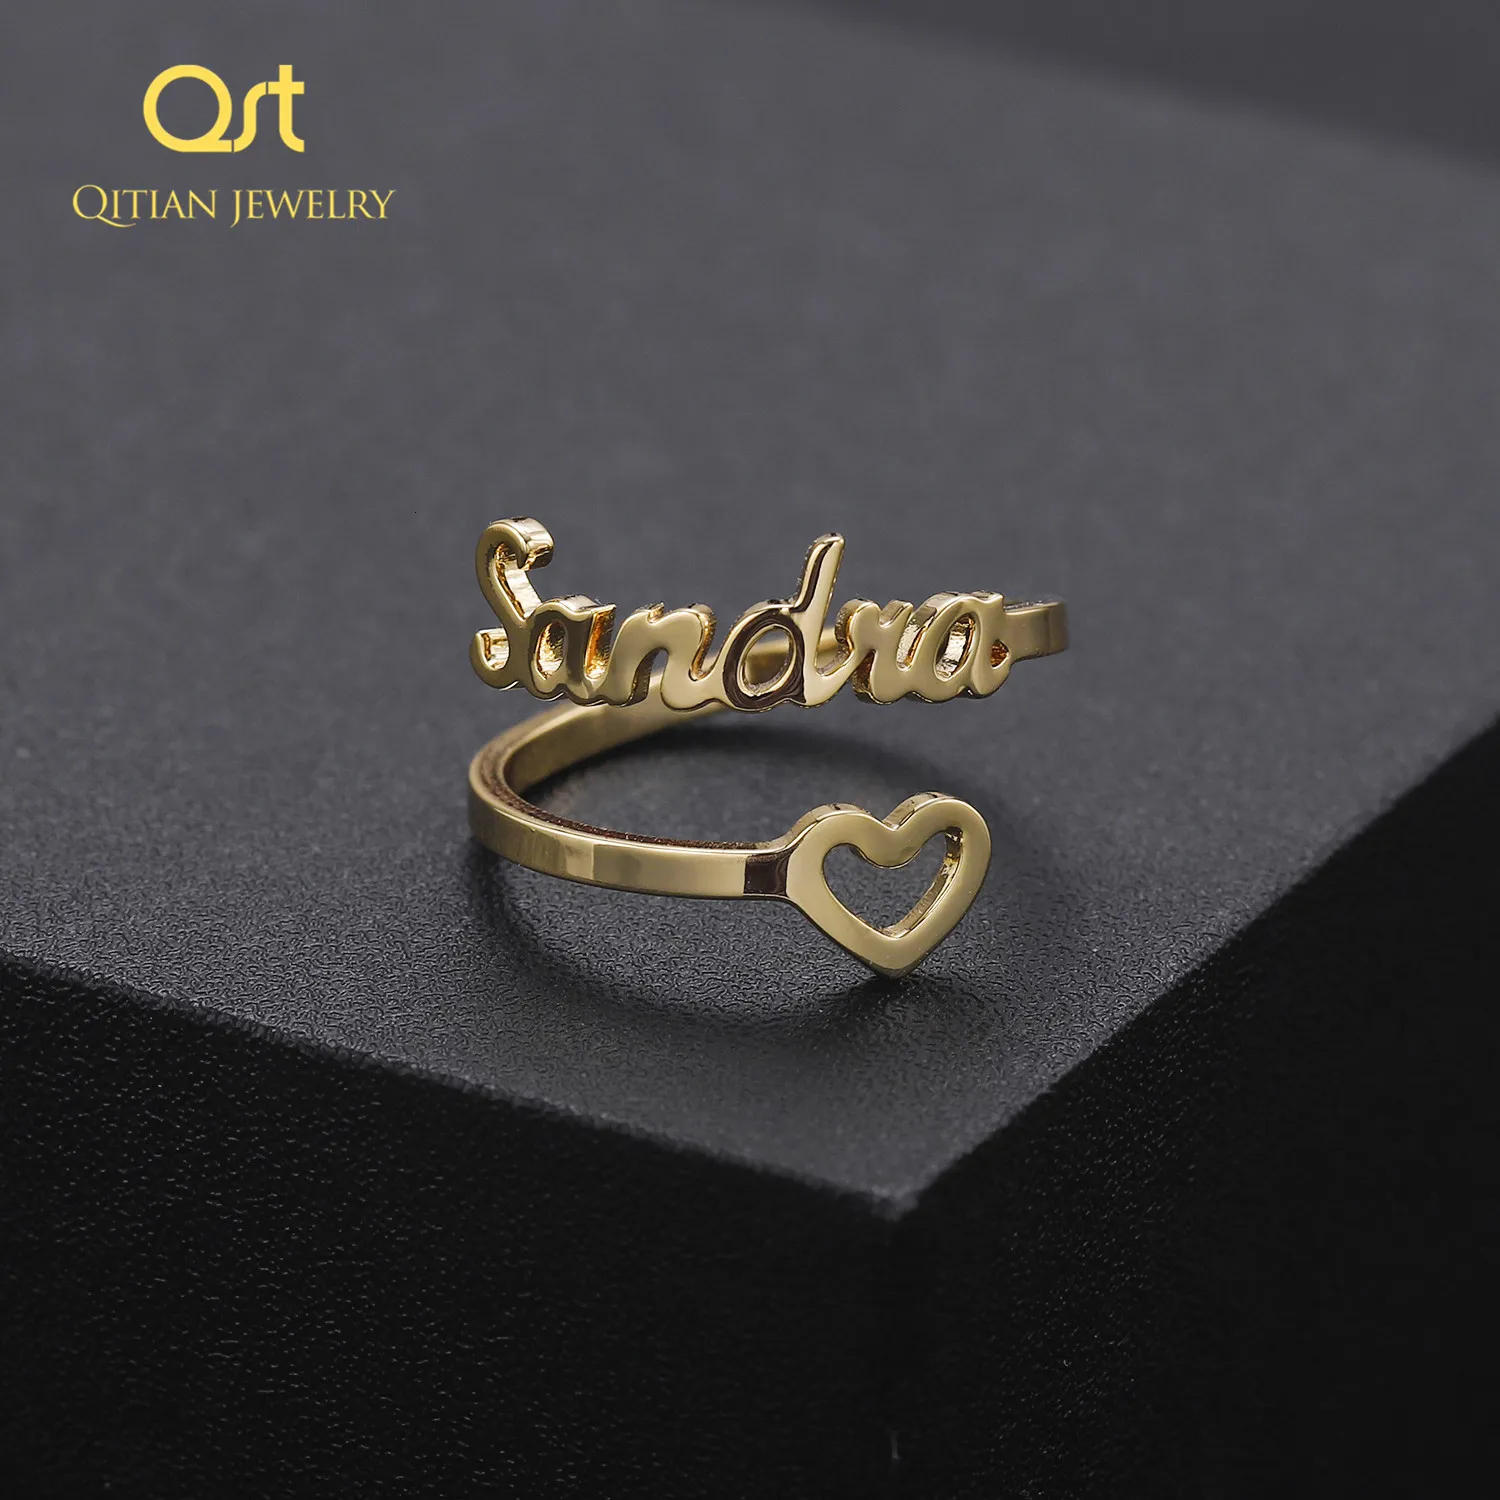 Band Rings Personalized Hollow Ring/Cut Unique Ring/Gift Statement Jewelry for Girlfriend Wife Mother - Adjustable Neckline 230724